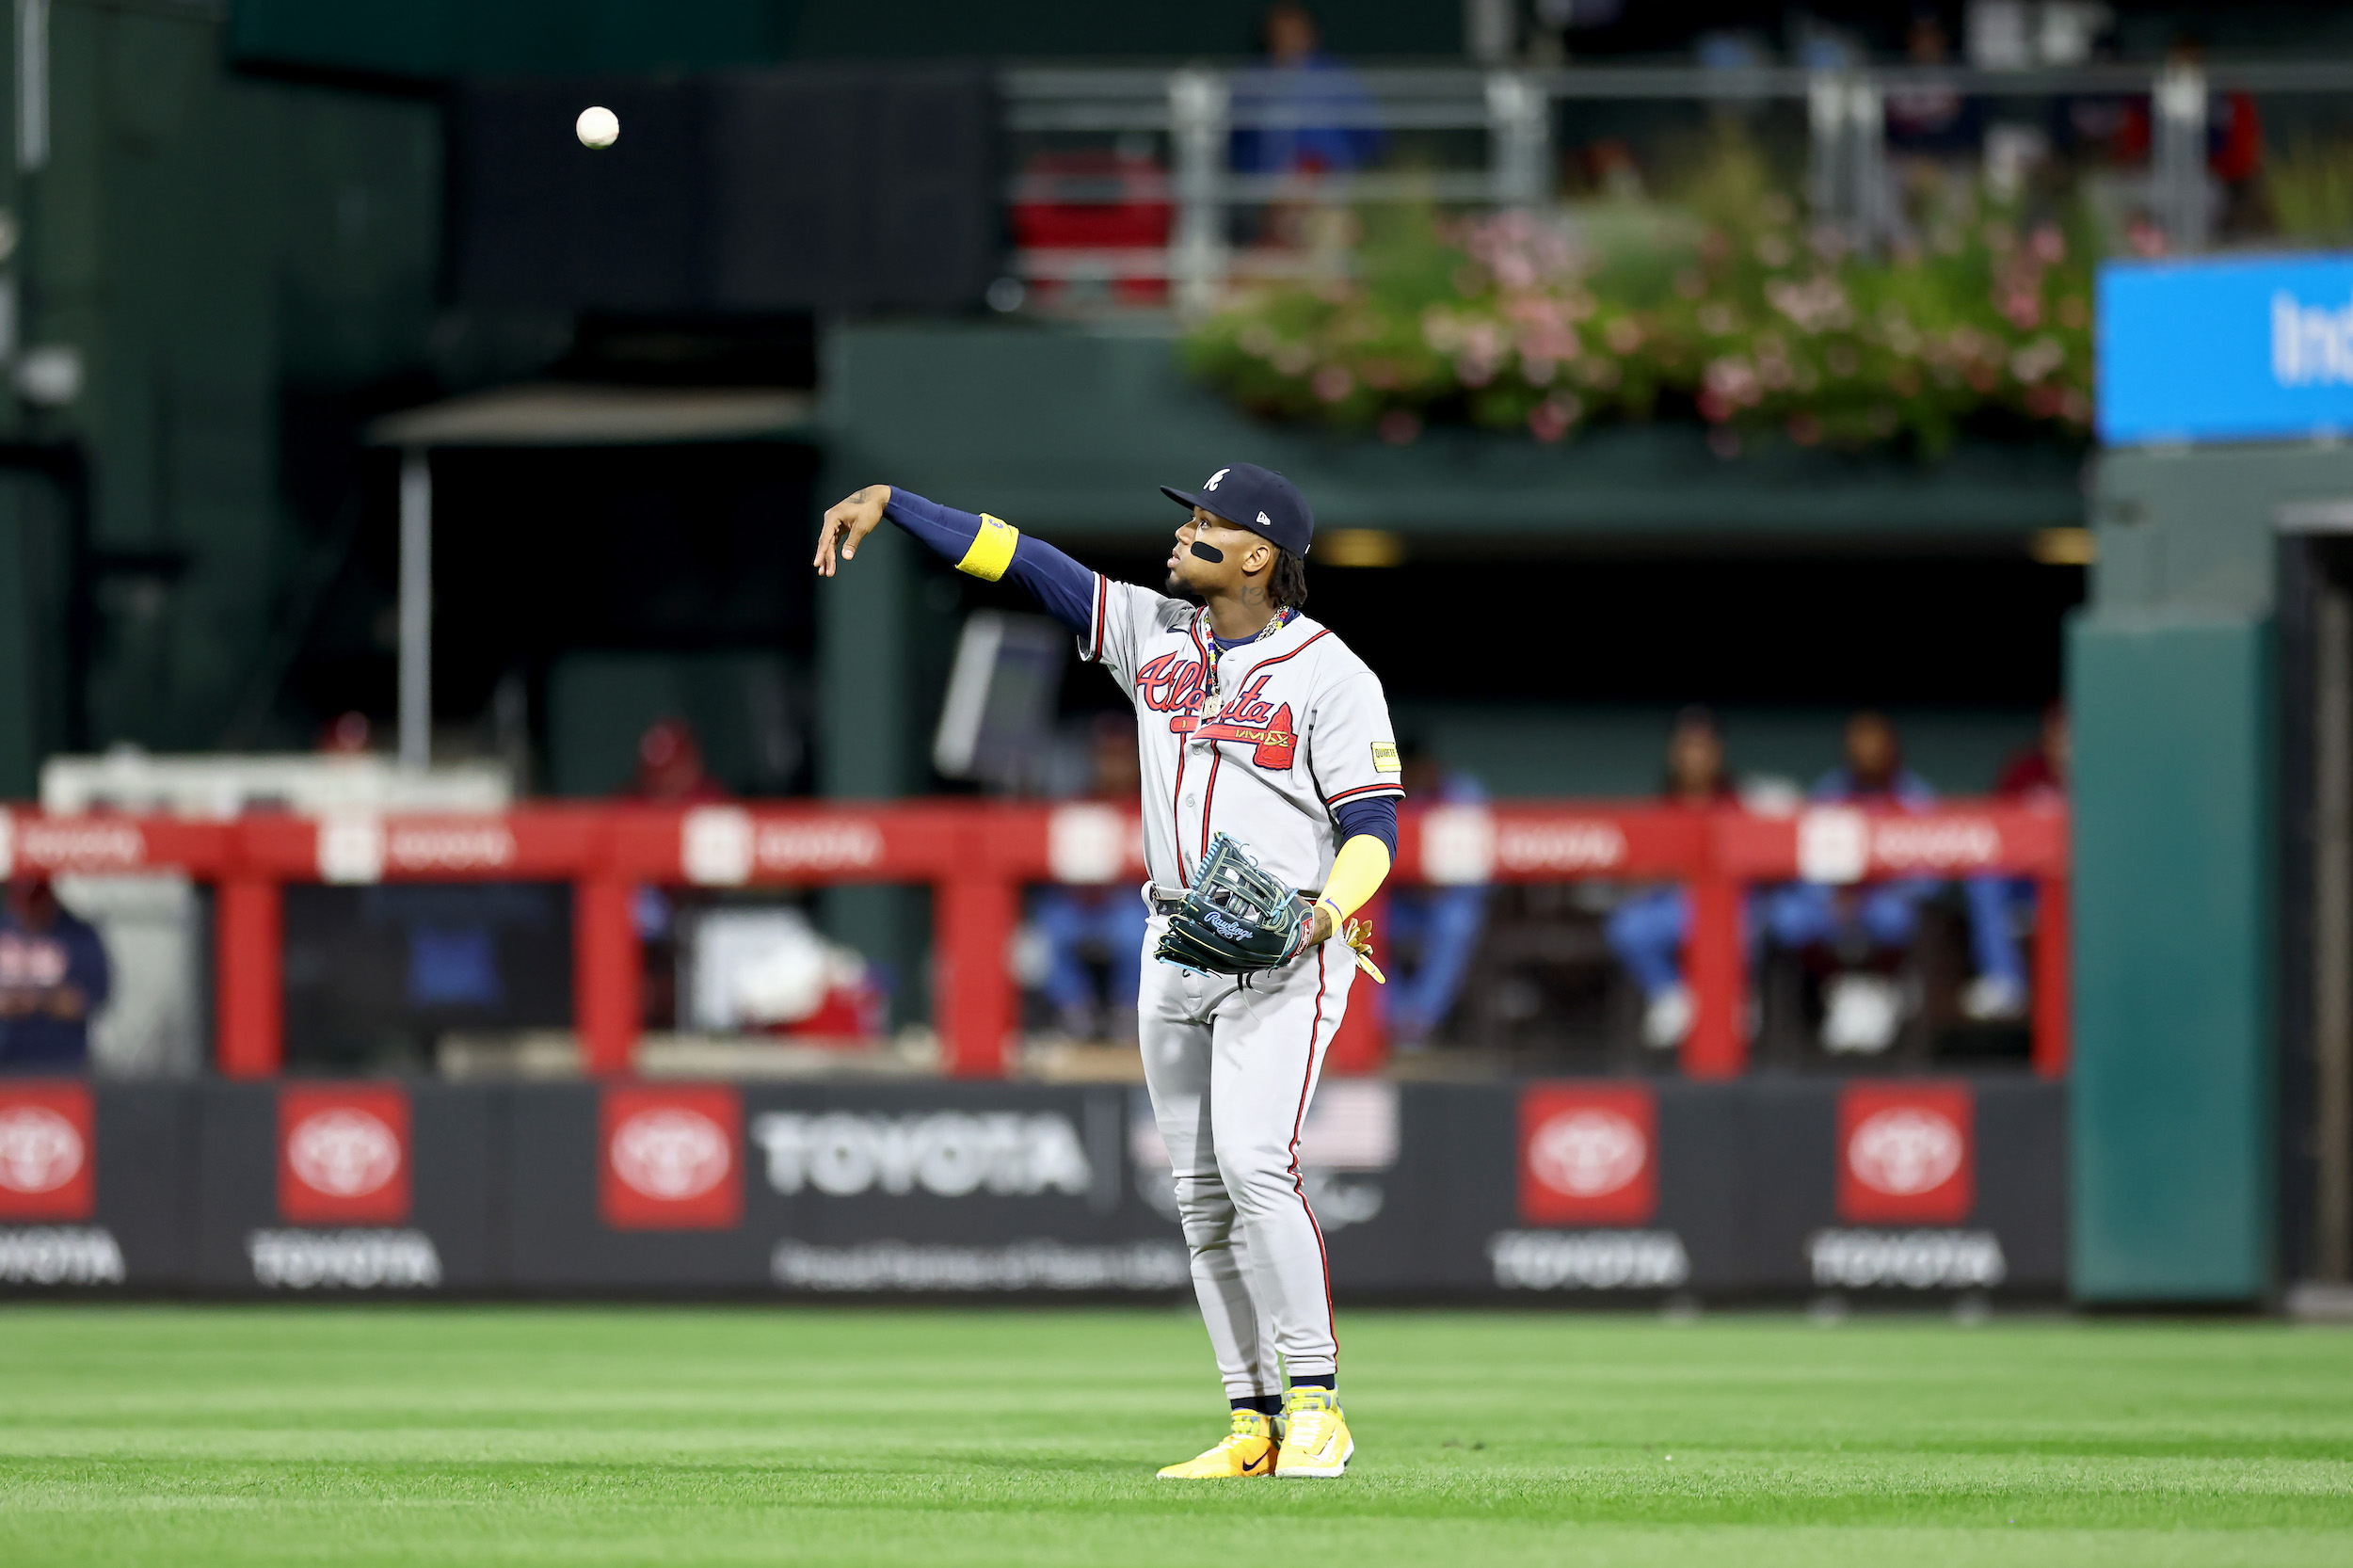 Ronald Acuña Jr. throws the ball back into the infield during Game 4 of the NLDS.